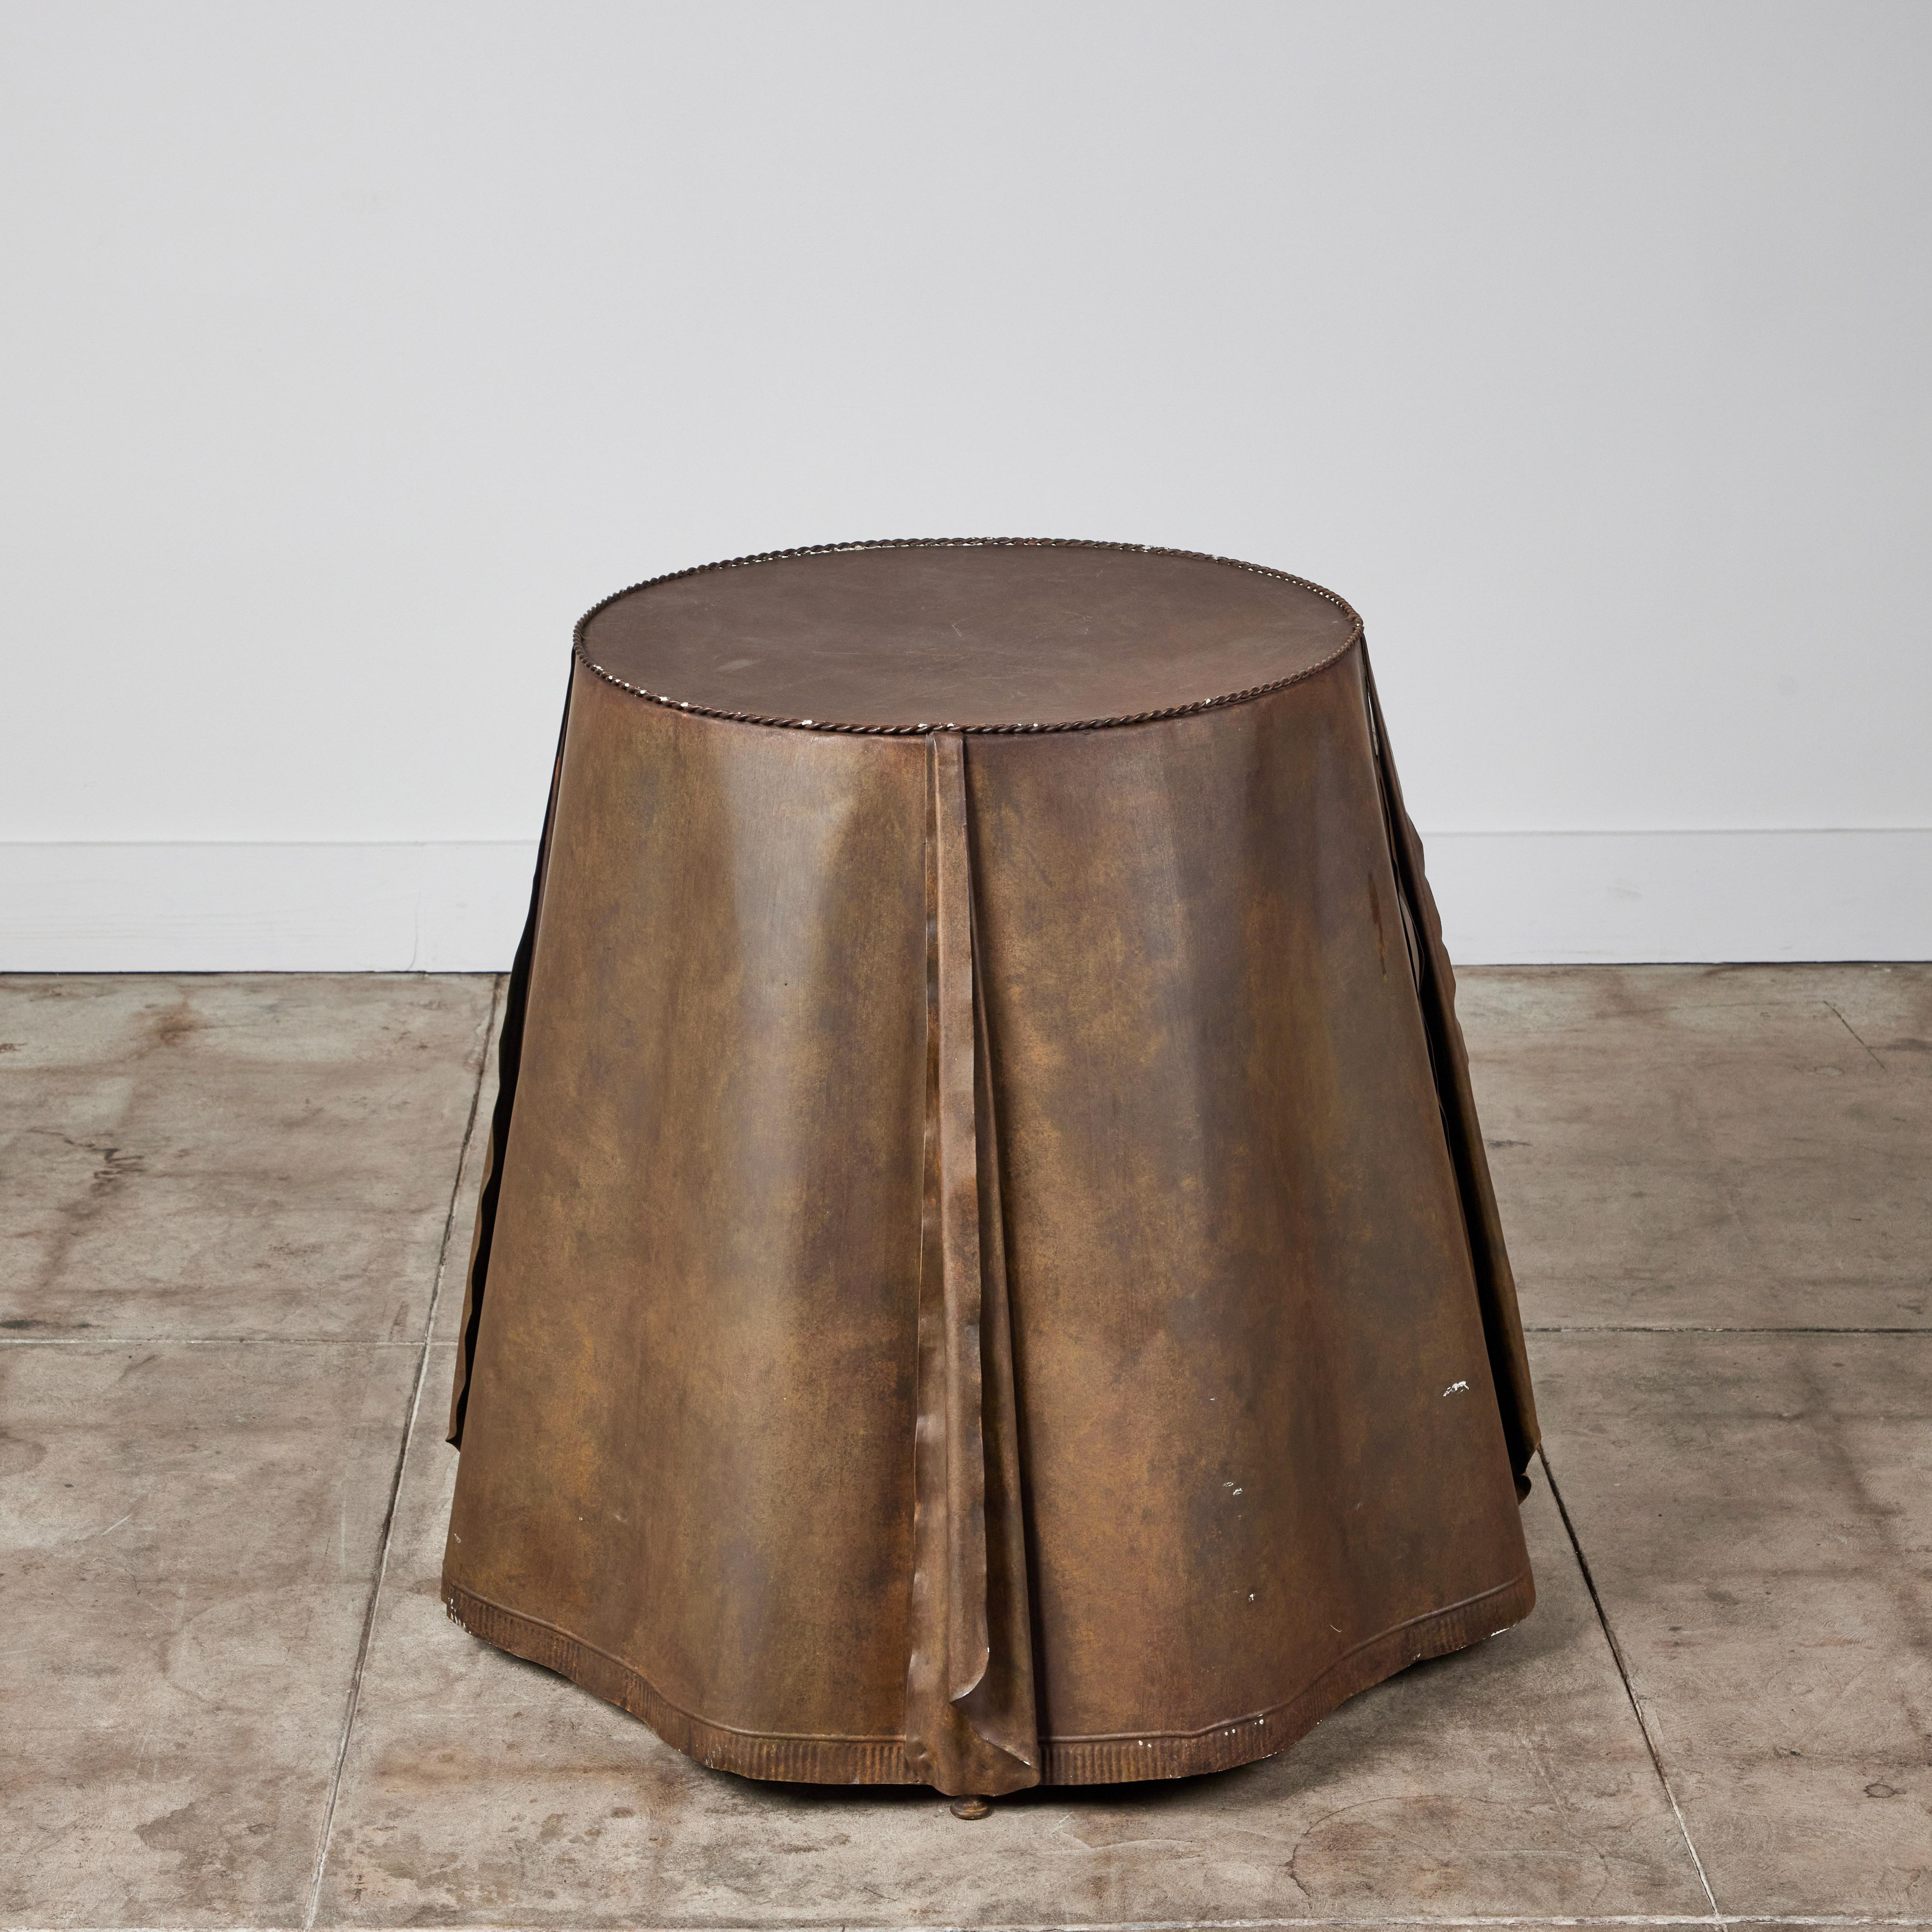 Steel side table, created in the style of American designer John Dickinson. The round table imitates draped table cloth, with sculptured pleats and folds, the surface is finished with a painted faux brass patina.

Stamped - Made in